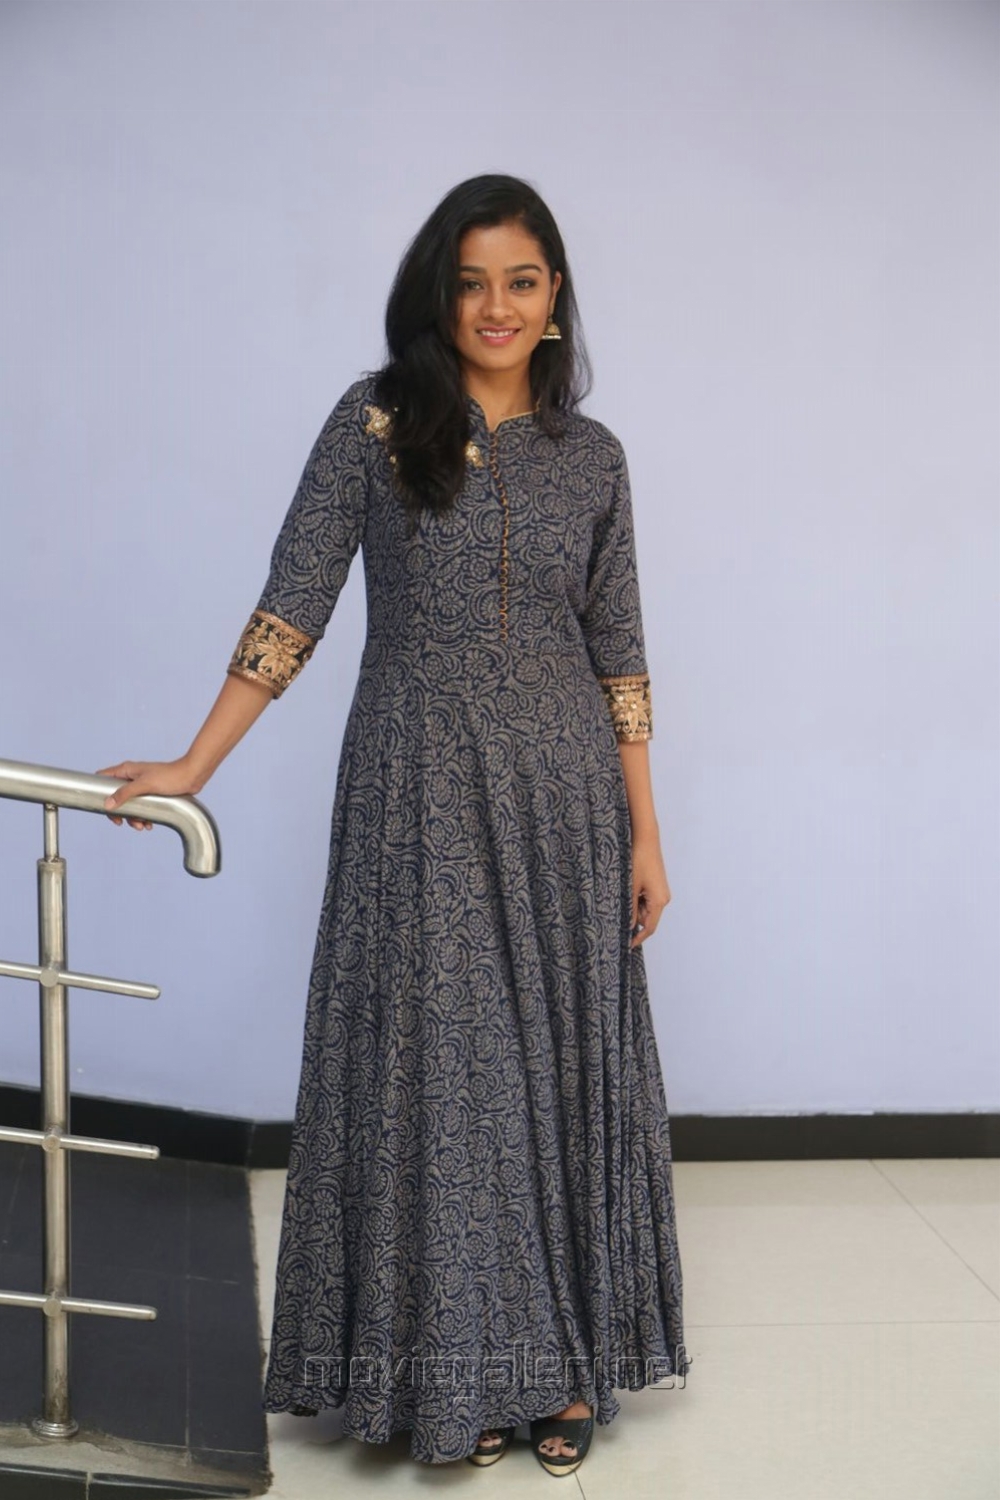 Gayathrie Shankar Images in Long Dress | New Movie Posters